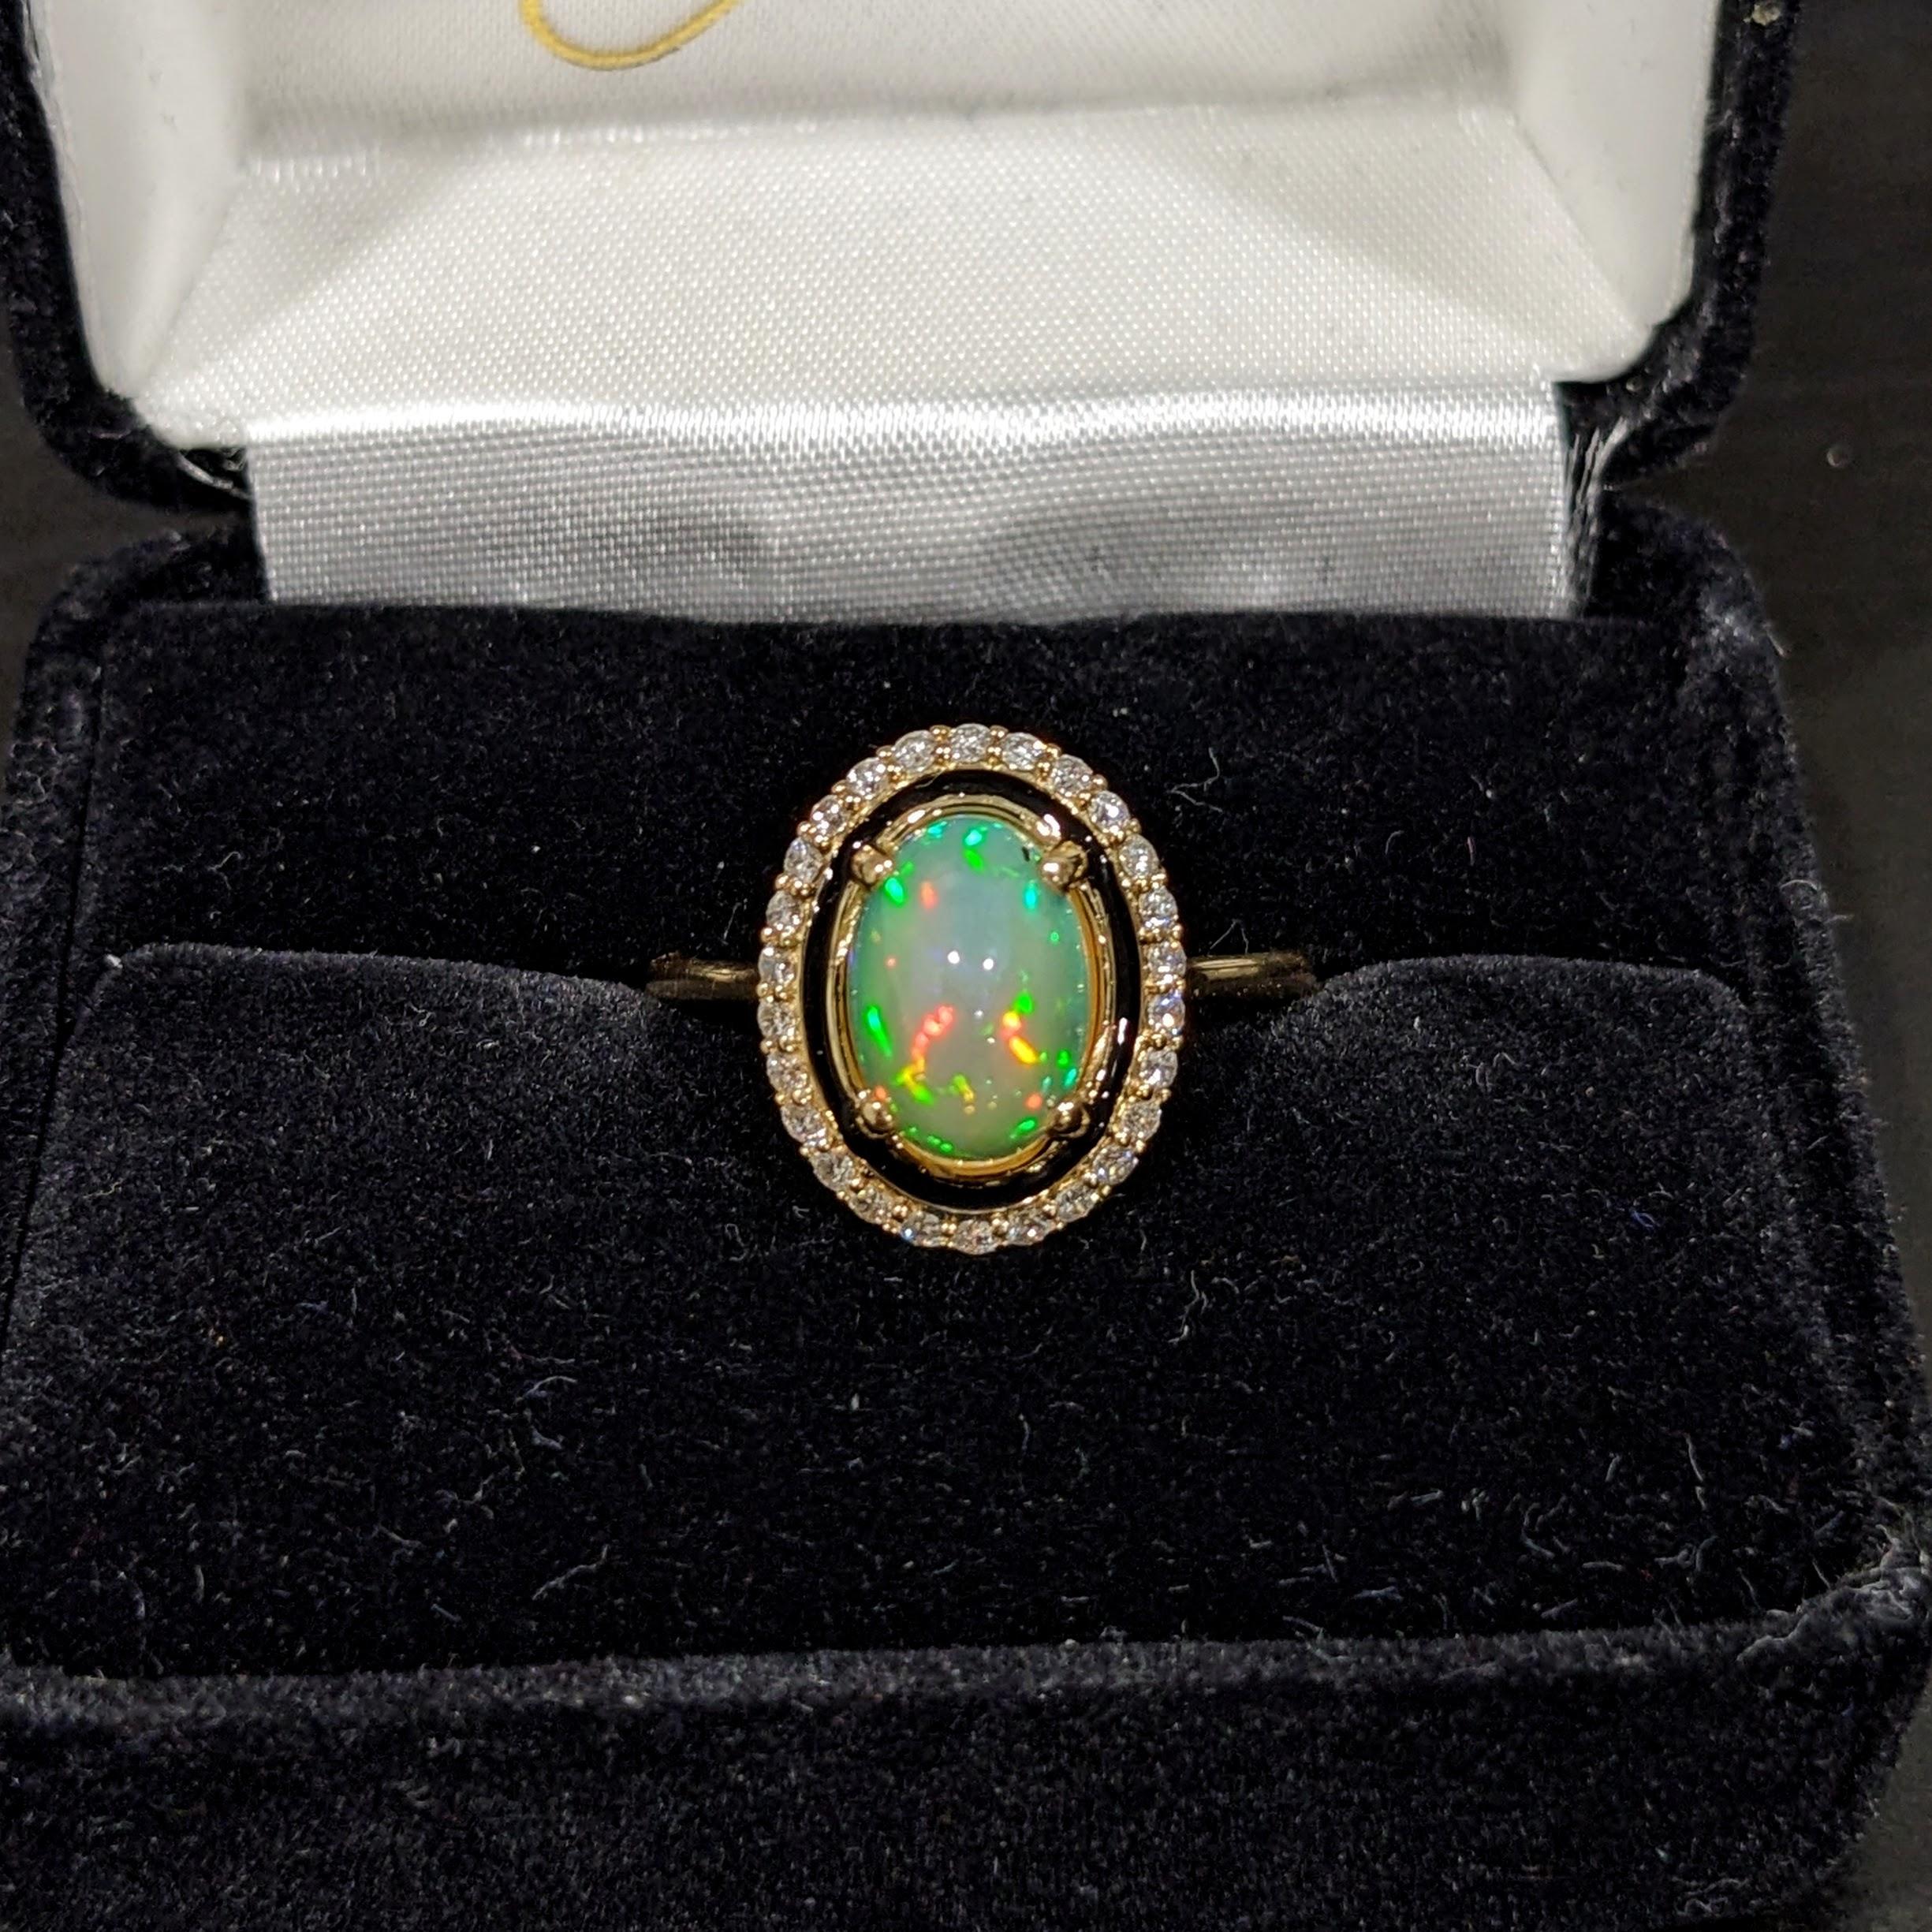 This opal ring exhibits an incredible play of color enhanced by this NNJ Designs original setting design with black enamel and natural diamonds set in 14k Yellow Gold.

Specifications:

Item Type: Ring
Center Stone: Opal
Treatment: None
Weight: